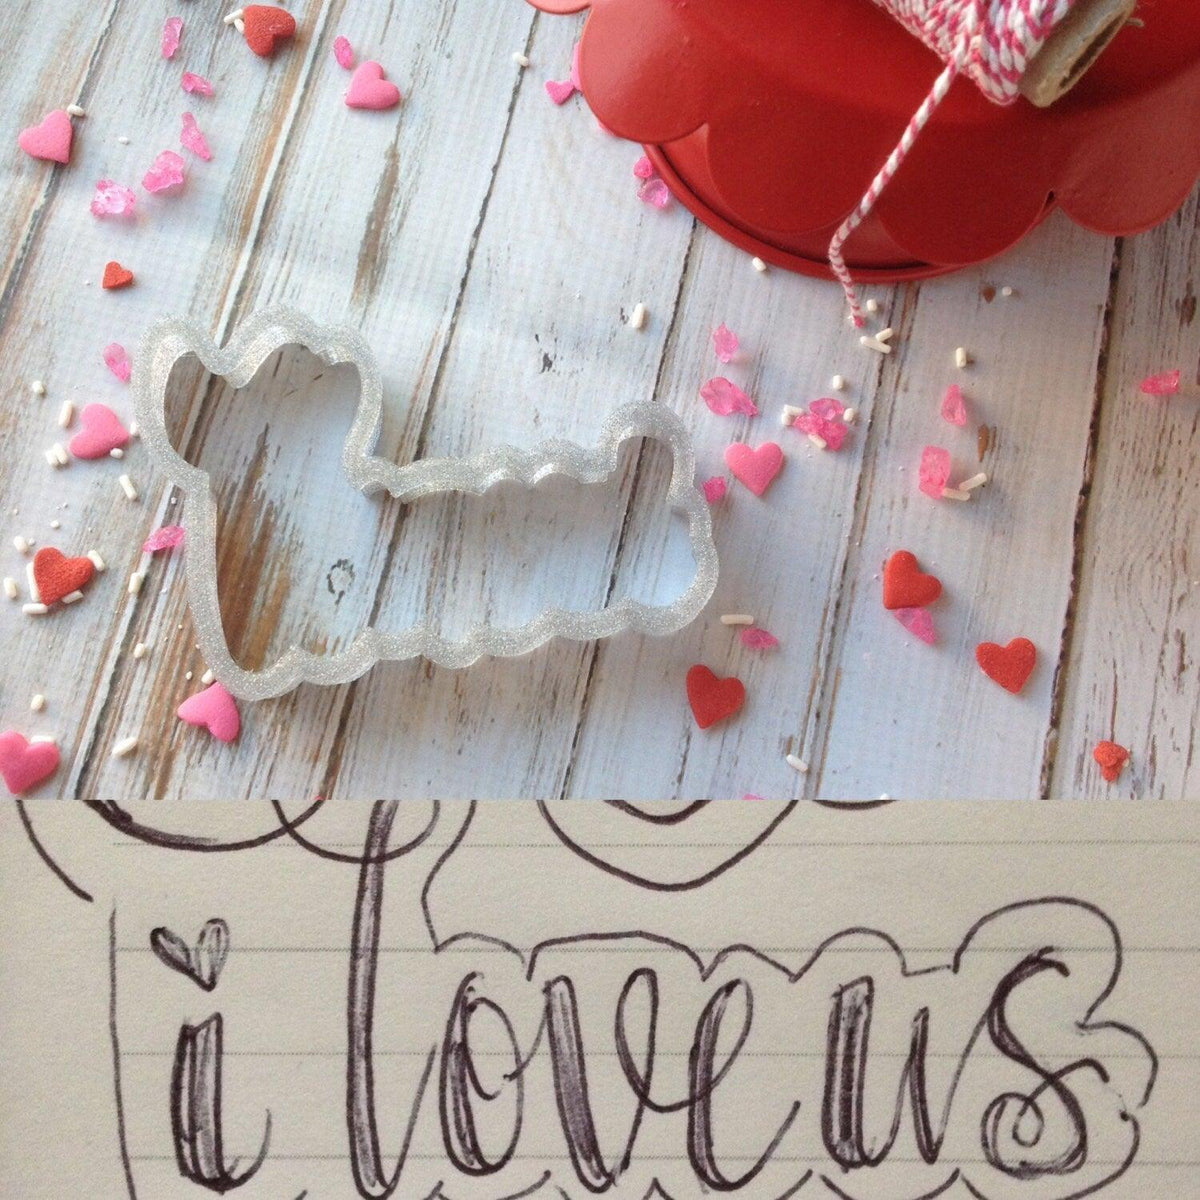 I Love Us Hand Lettered Cookie Cutter - Sweetleigh 